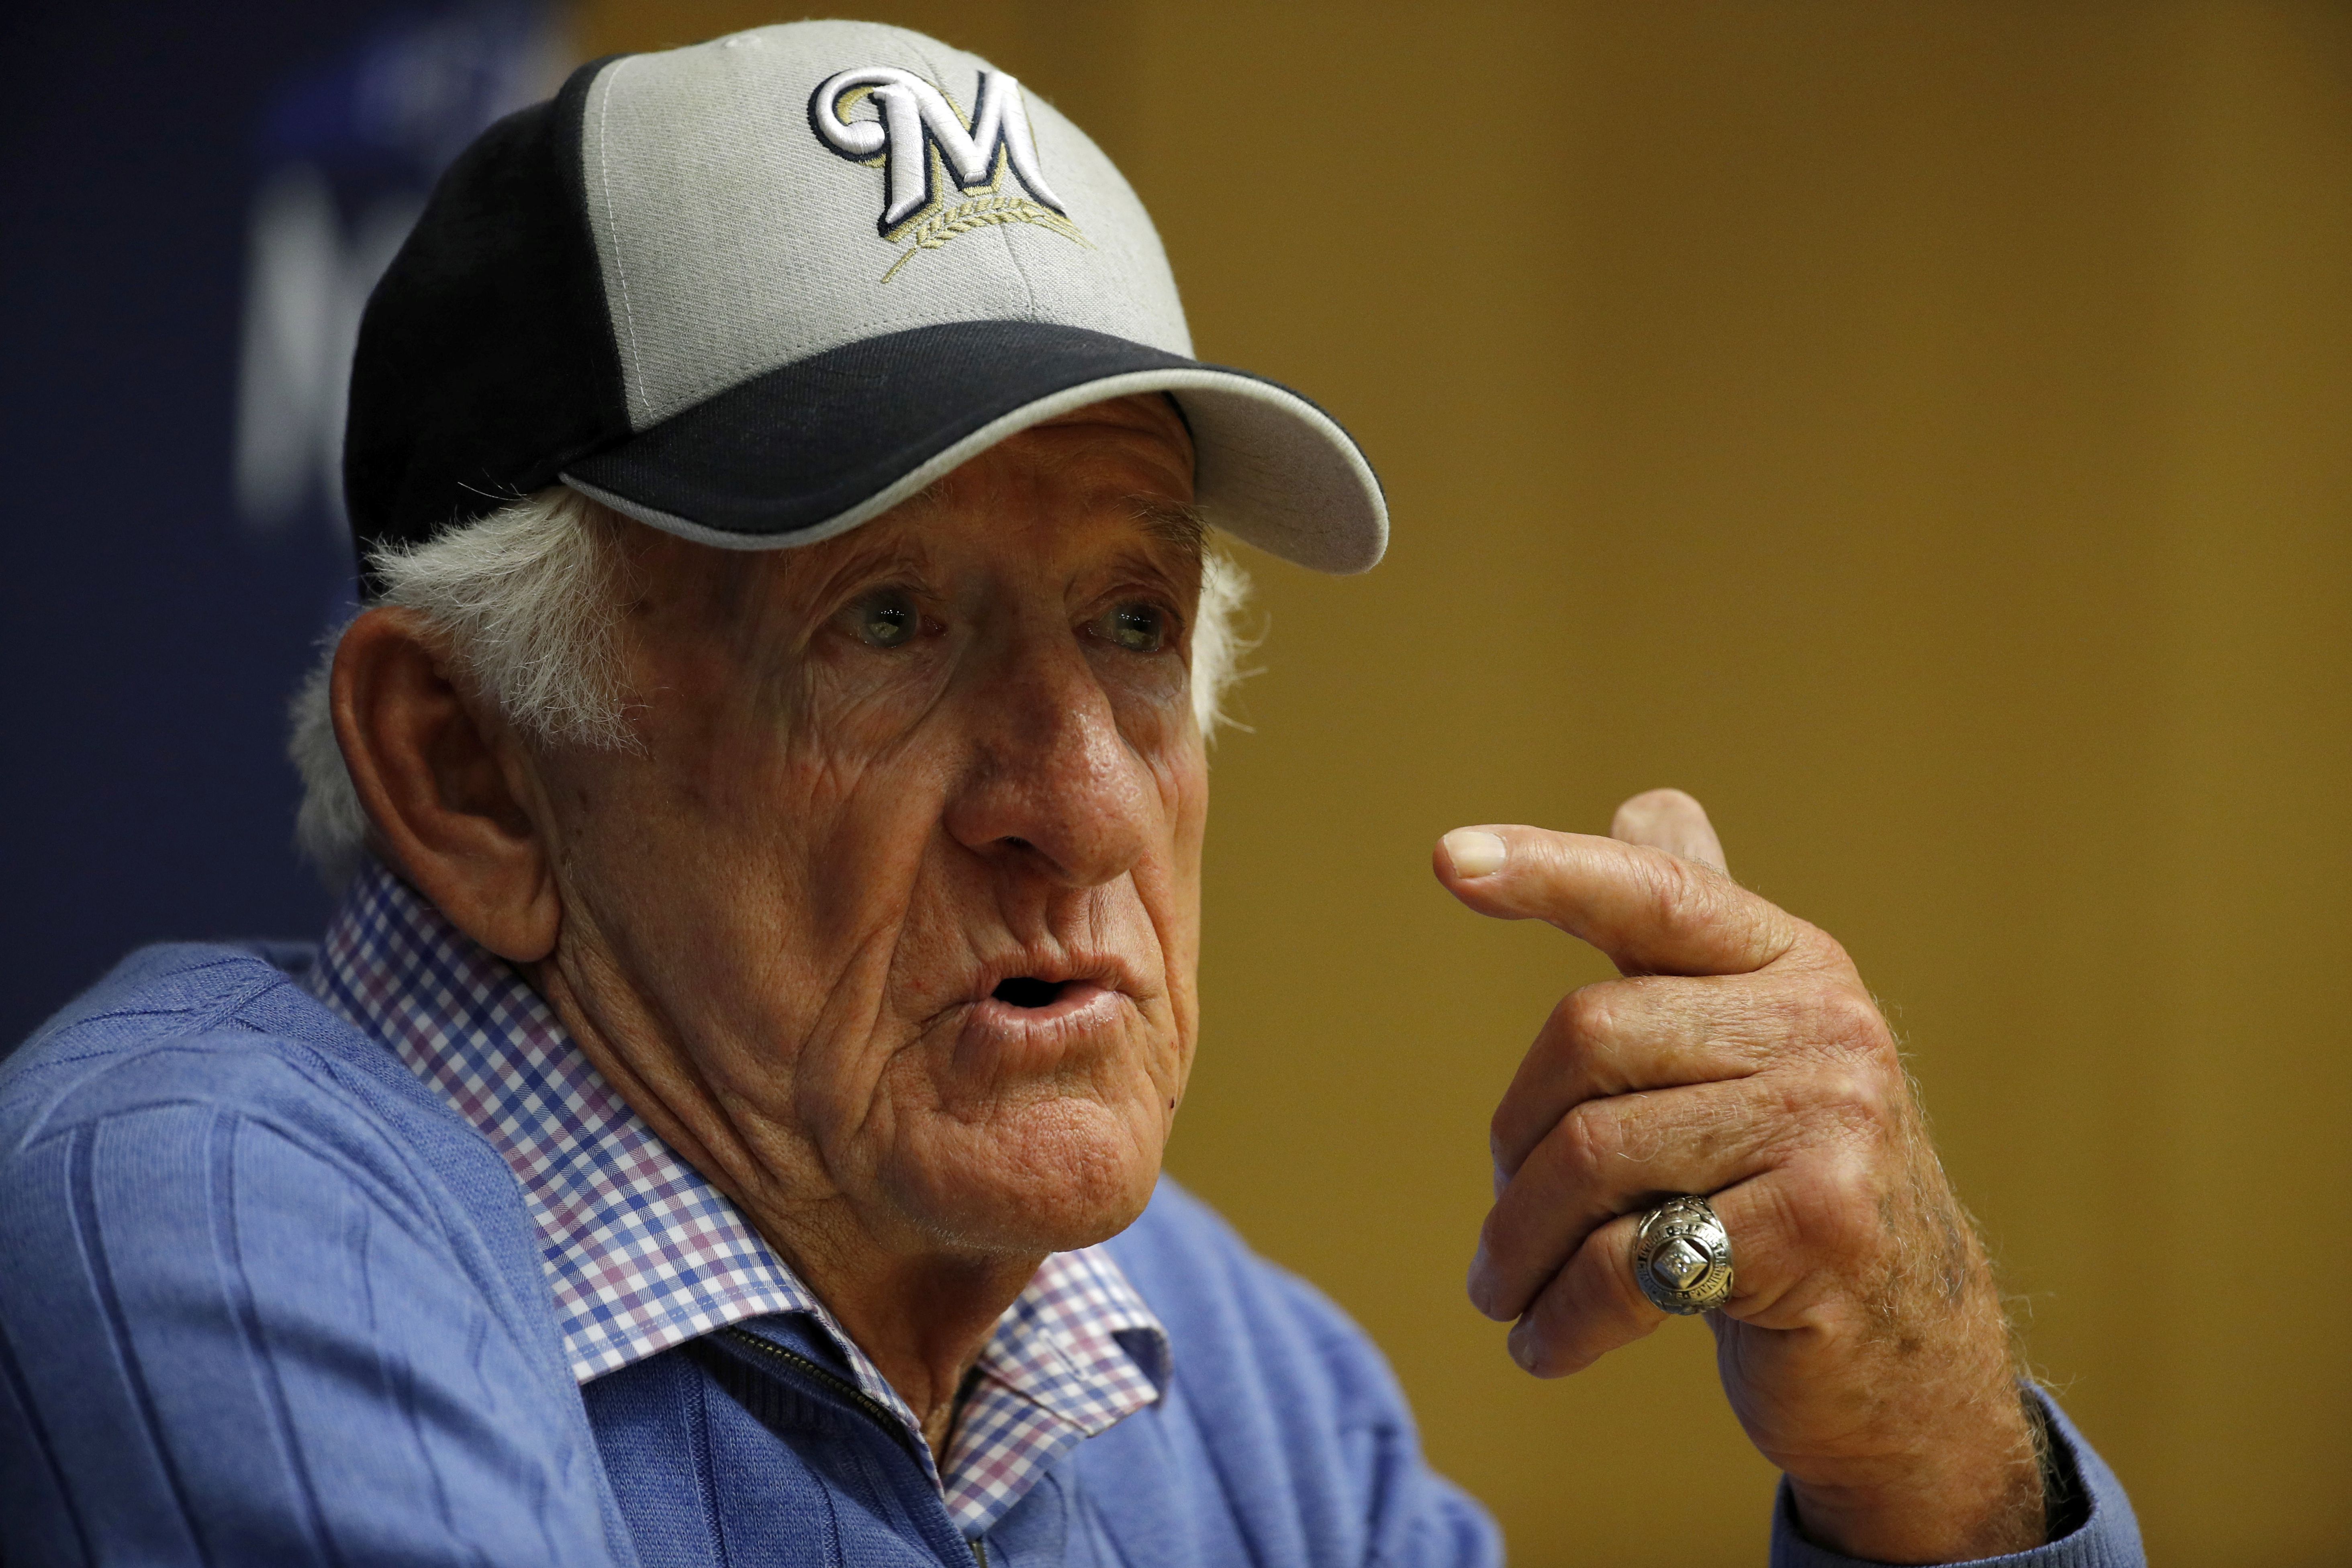 For Bob Uecker's 50+ years of broadcasting Brewers baseball here